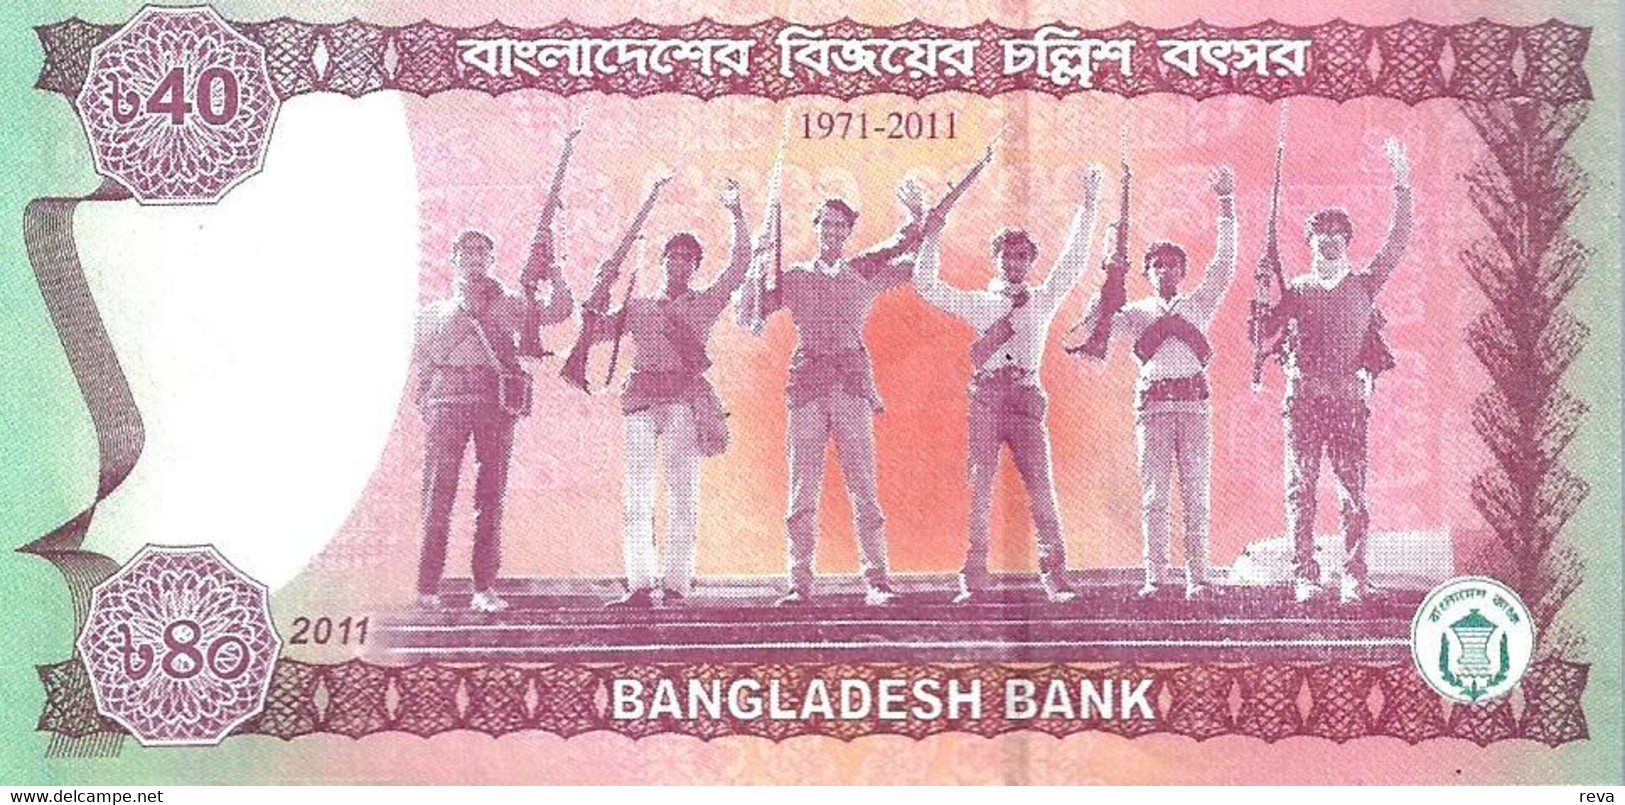 BANGLADESH 40 TAKA RED MAN 40TH ANN OF INDEPENDENCE  FRONT MEN BACK DATED 2011 P60 UNC READ DESCRIPTION !! - Bangladesh